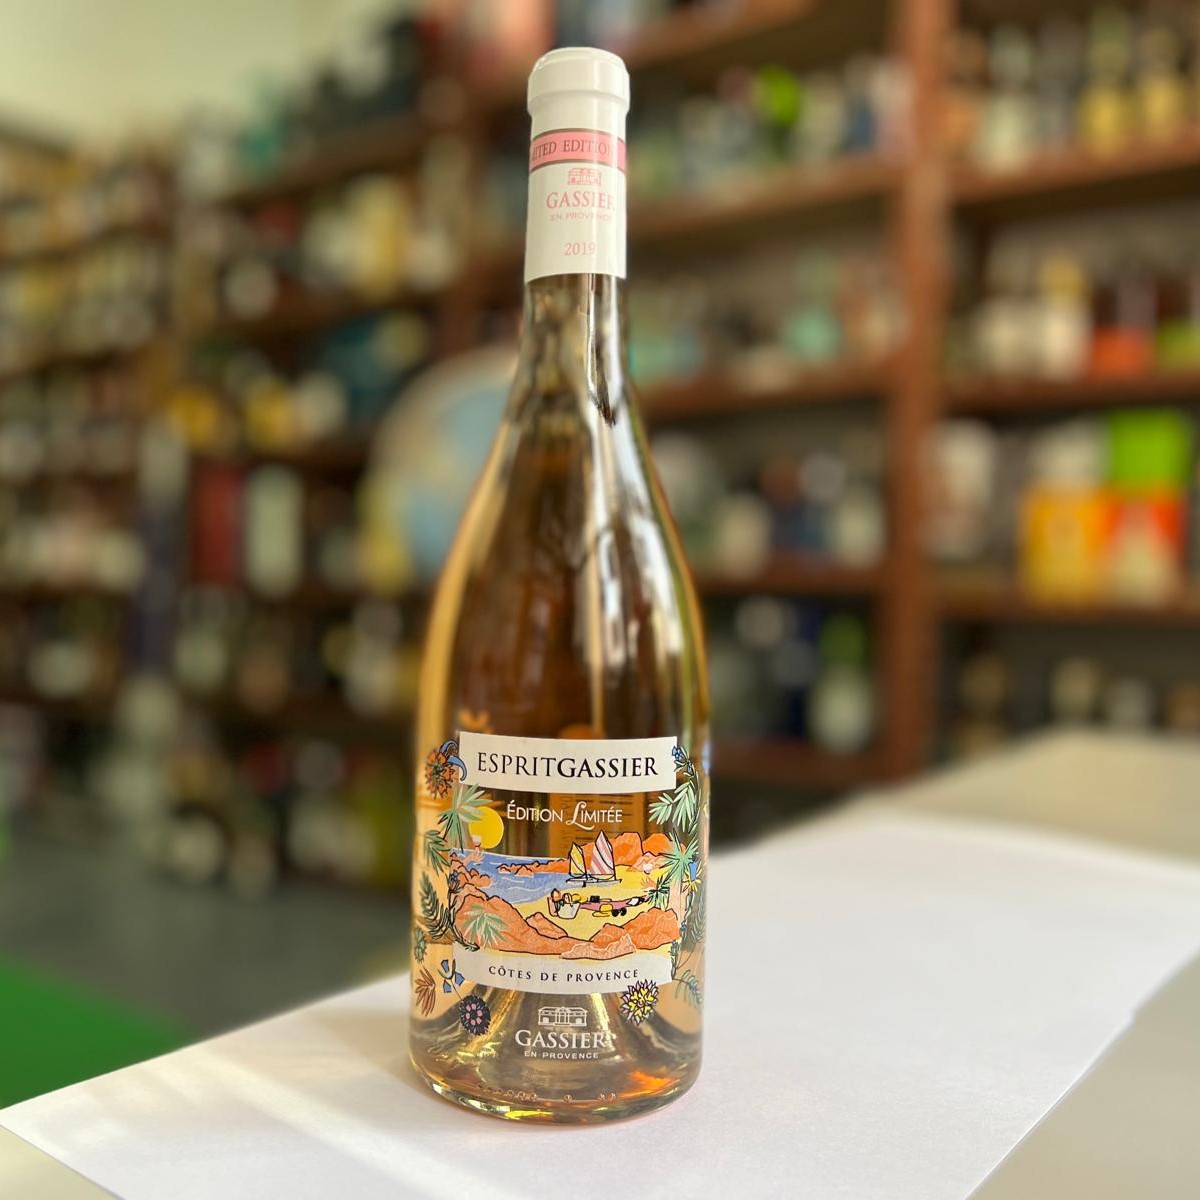 ESPRITGASSIER Limited Edition Rose Wine – 750ml